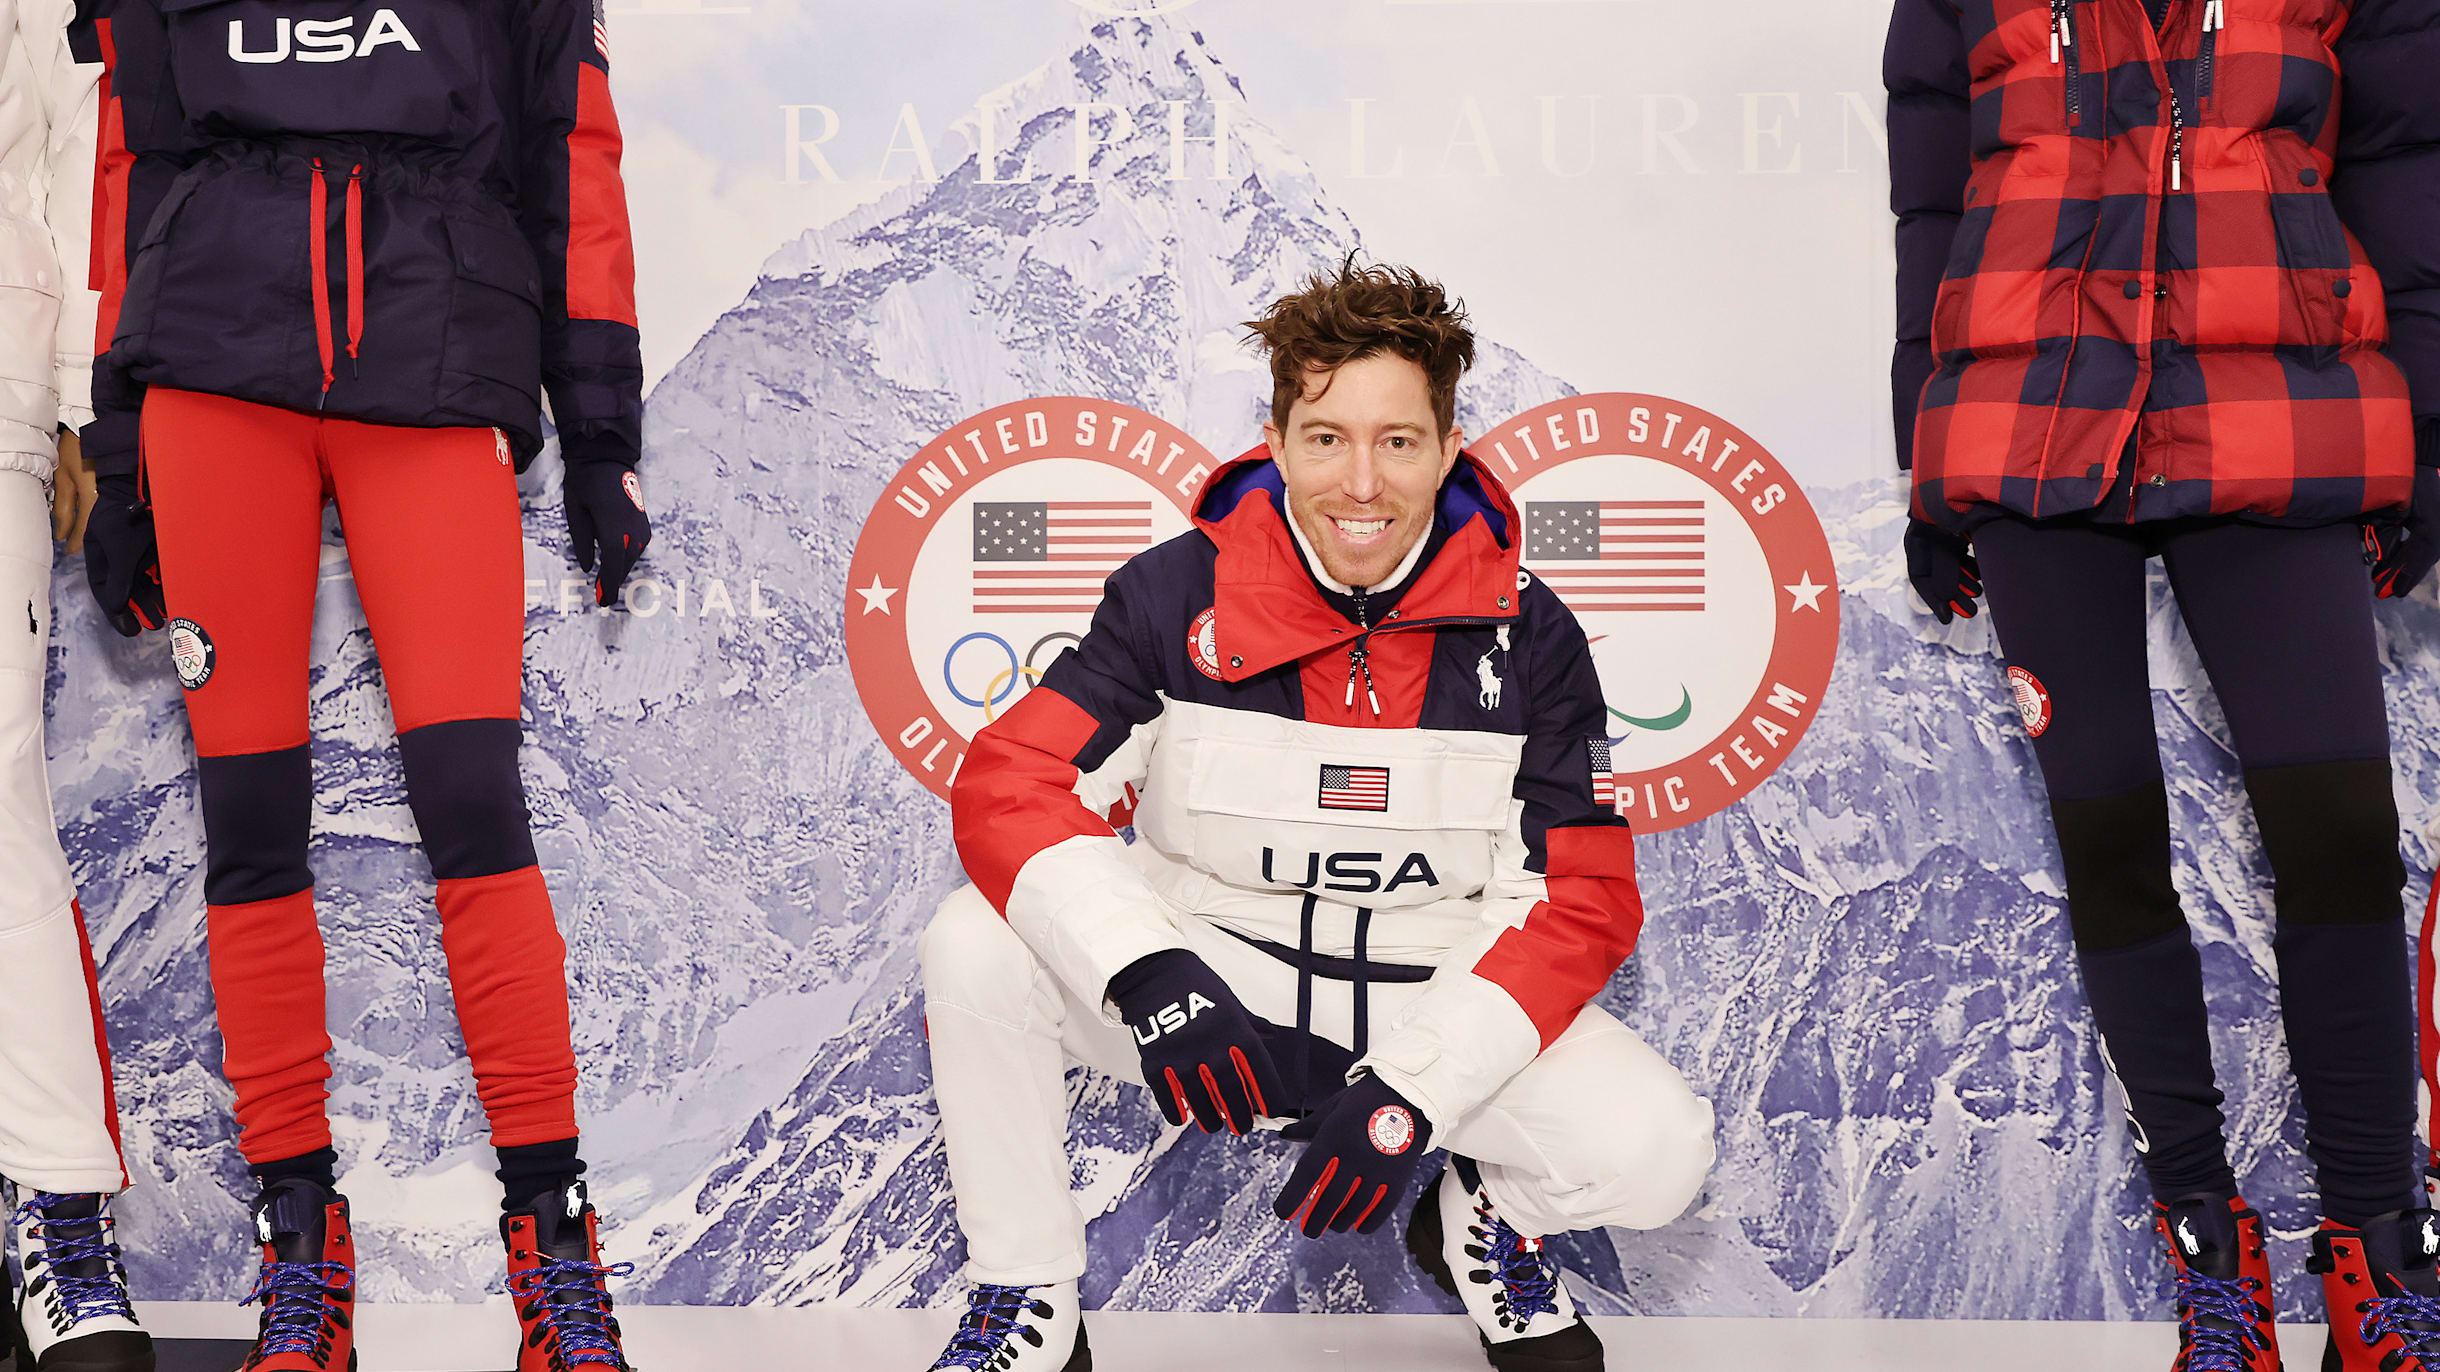 Shaun White on sharing passion with the late fashion designer